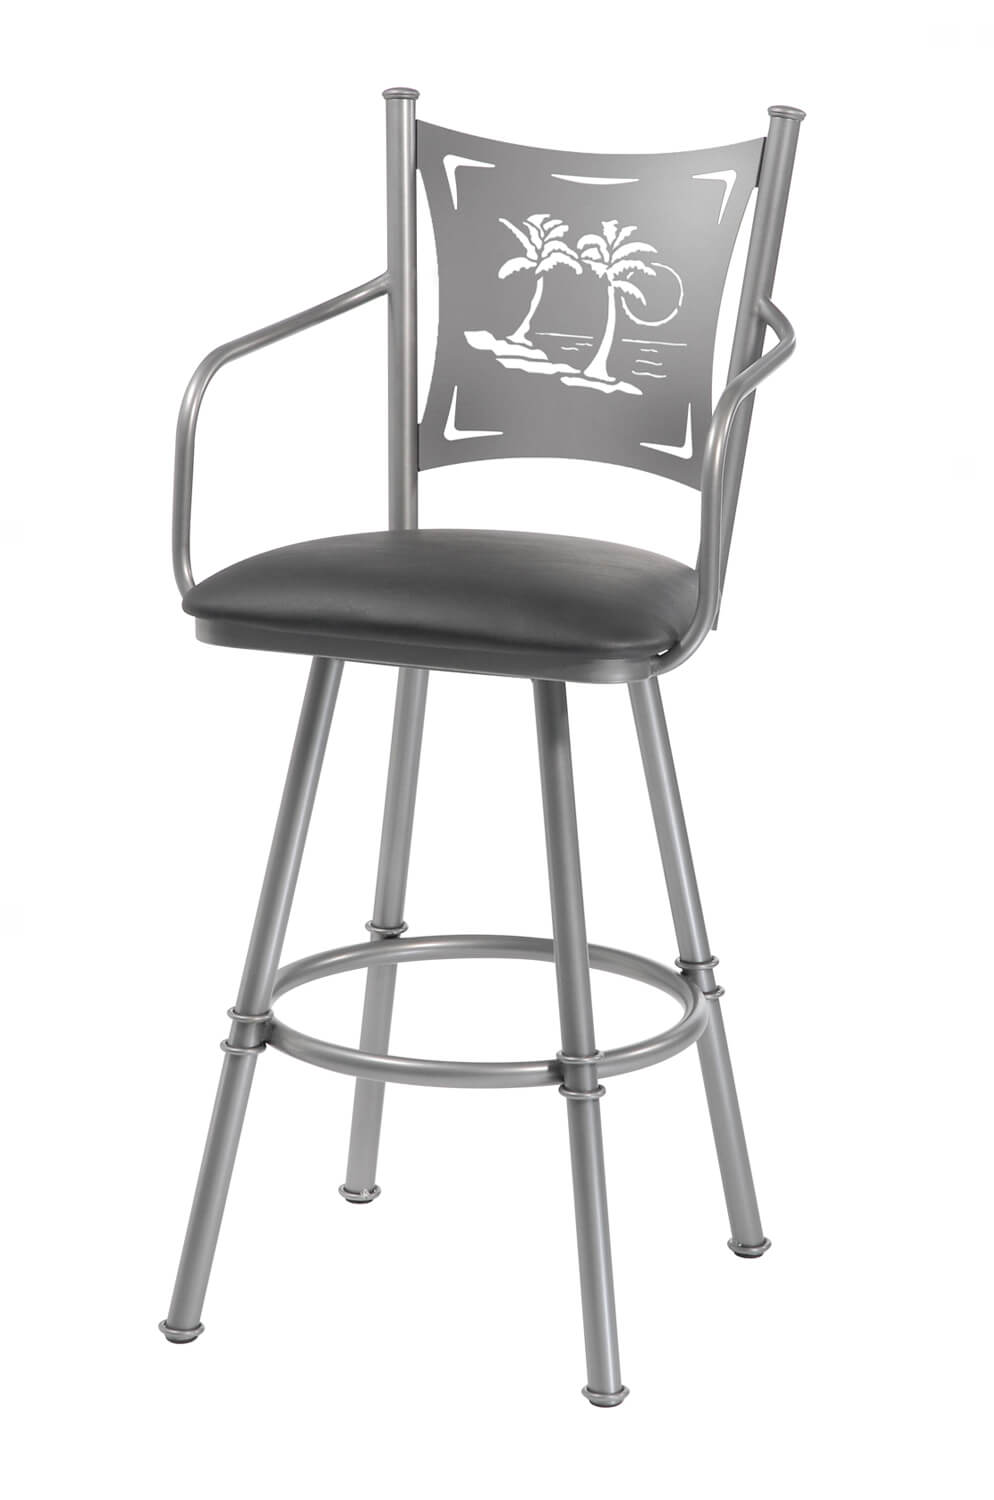 Trica's Creation Collection Swivel Bar Stool with Arms and Palm Tree Laser Cut Back